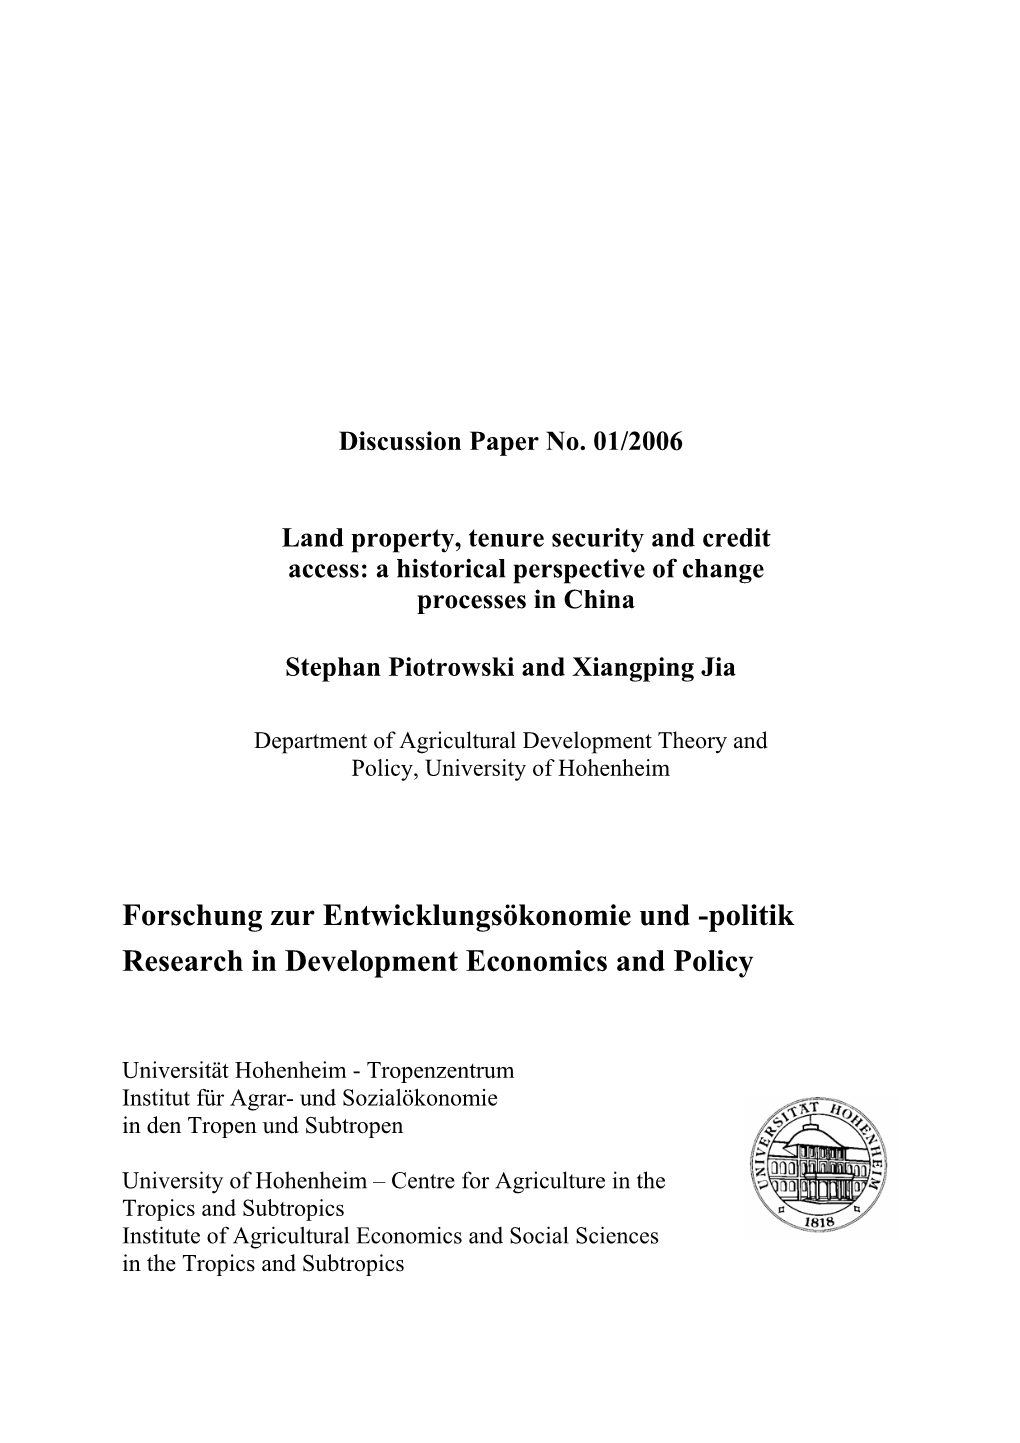 01/2006: Land Property, Tenure Security and Credit Access